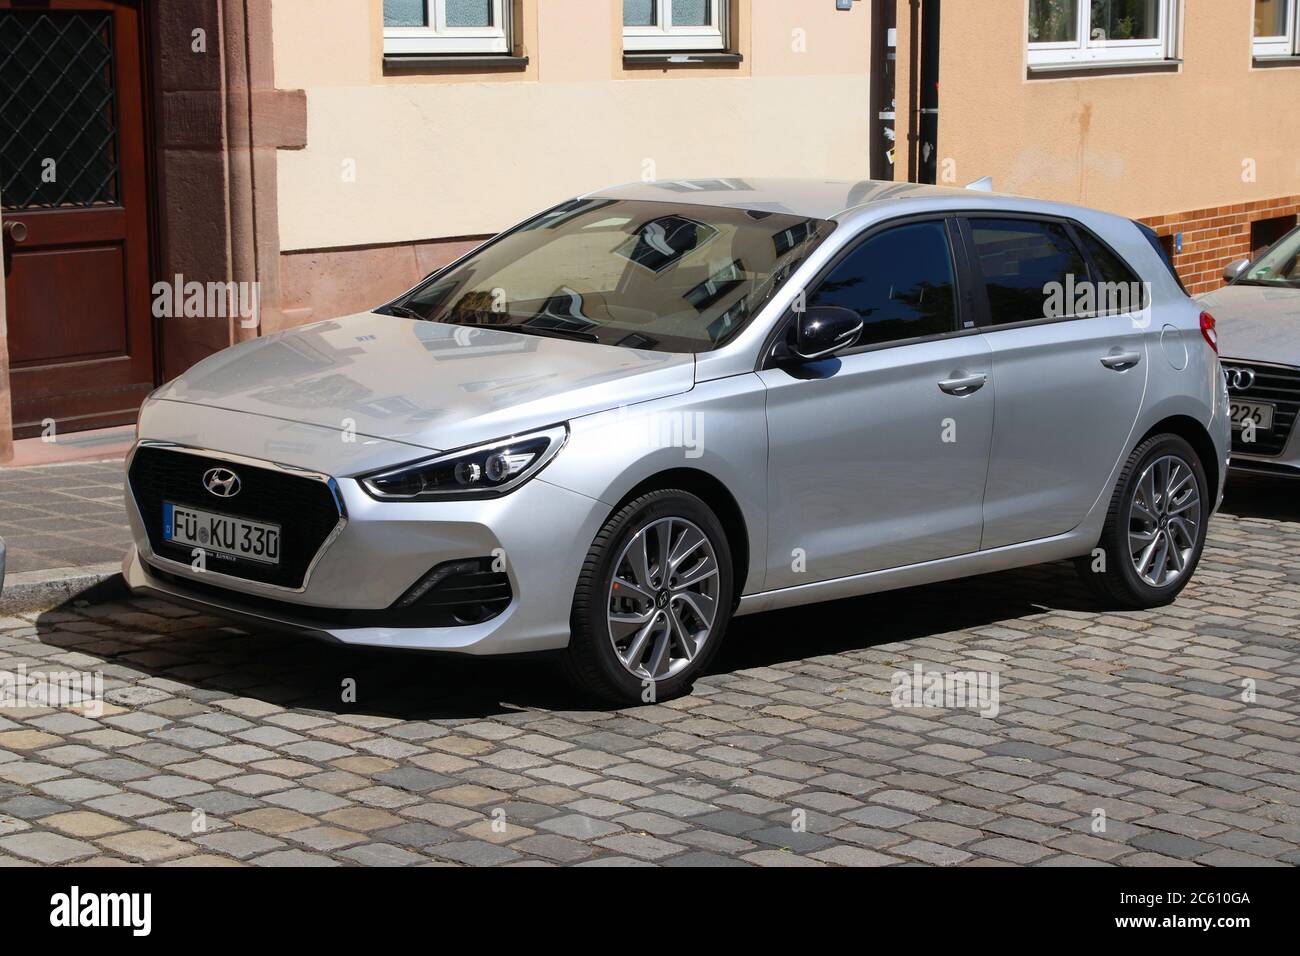 NUREMBERG, GERMANY - MAY 7, 2018: Silver Hyundai i30 compact car parked in  Germany. There were 45.8 million cars registered in Germany (as of 2017  Stock Photo - Alamy